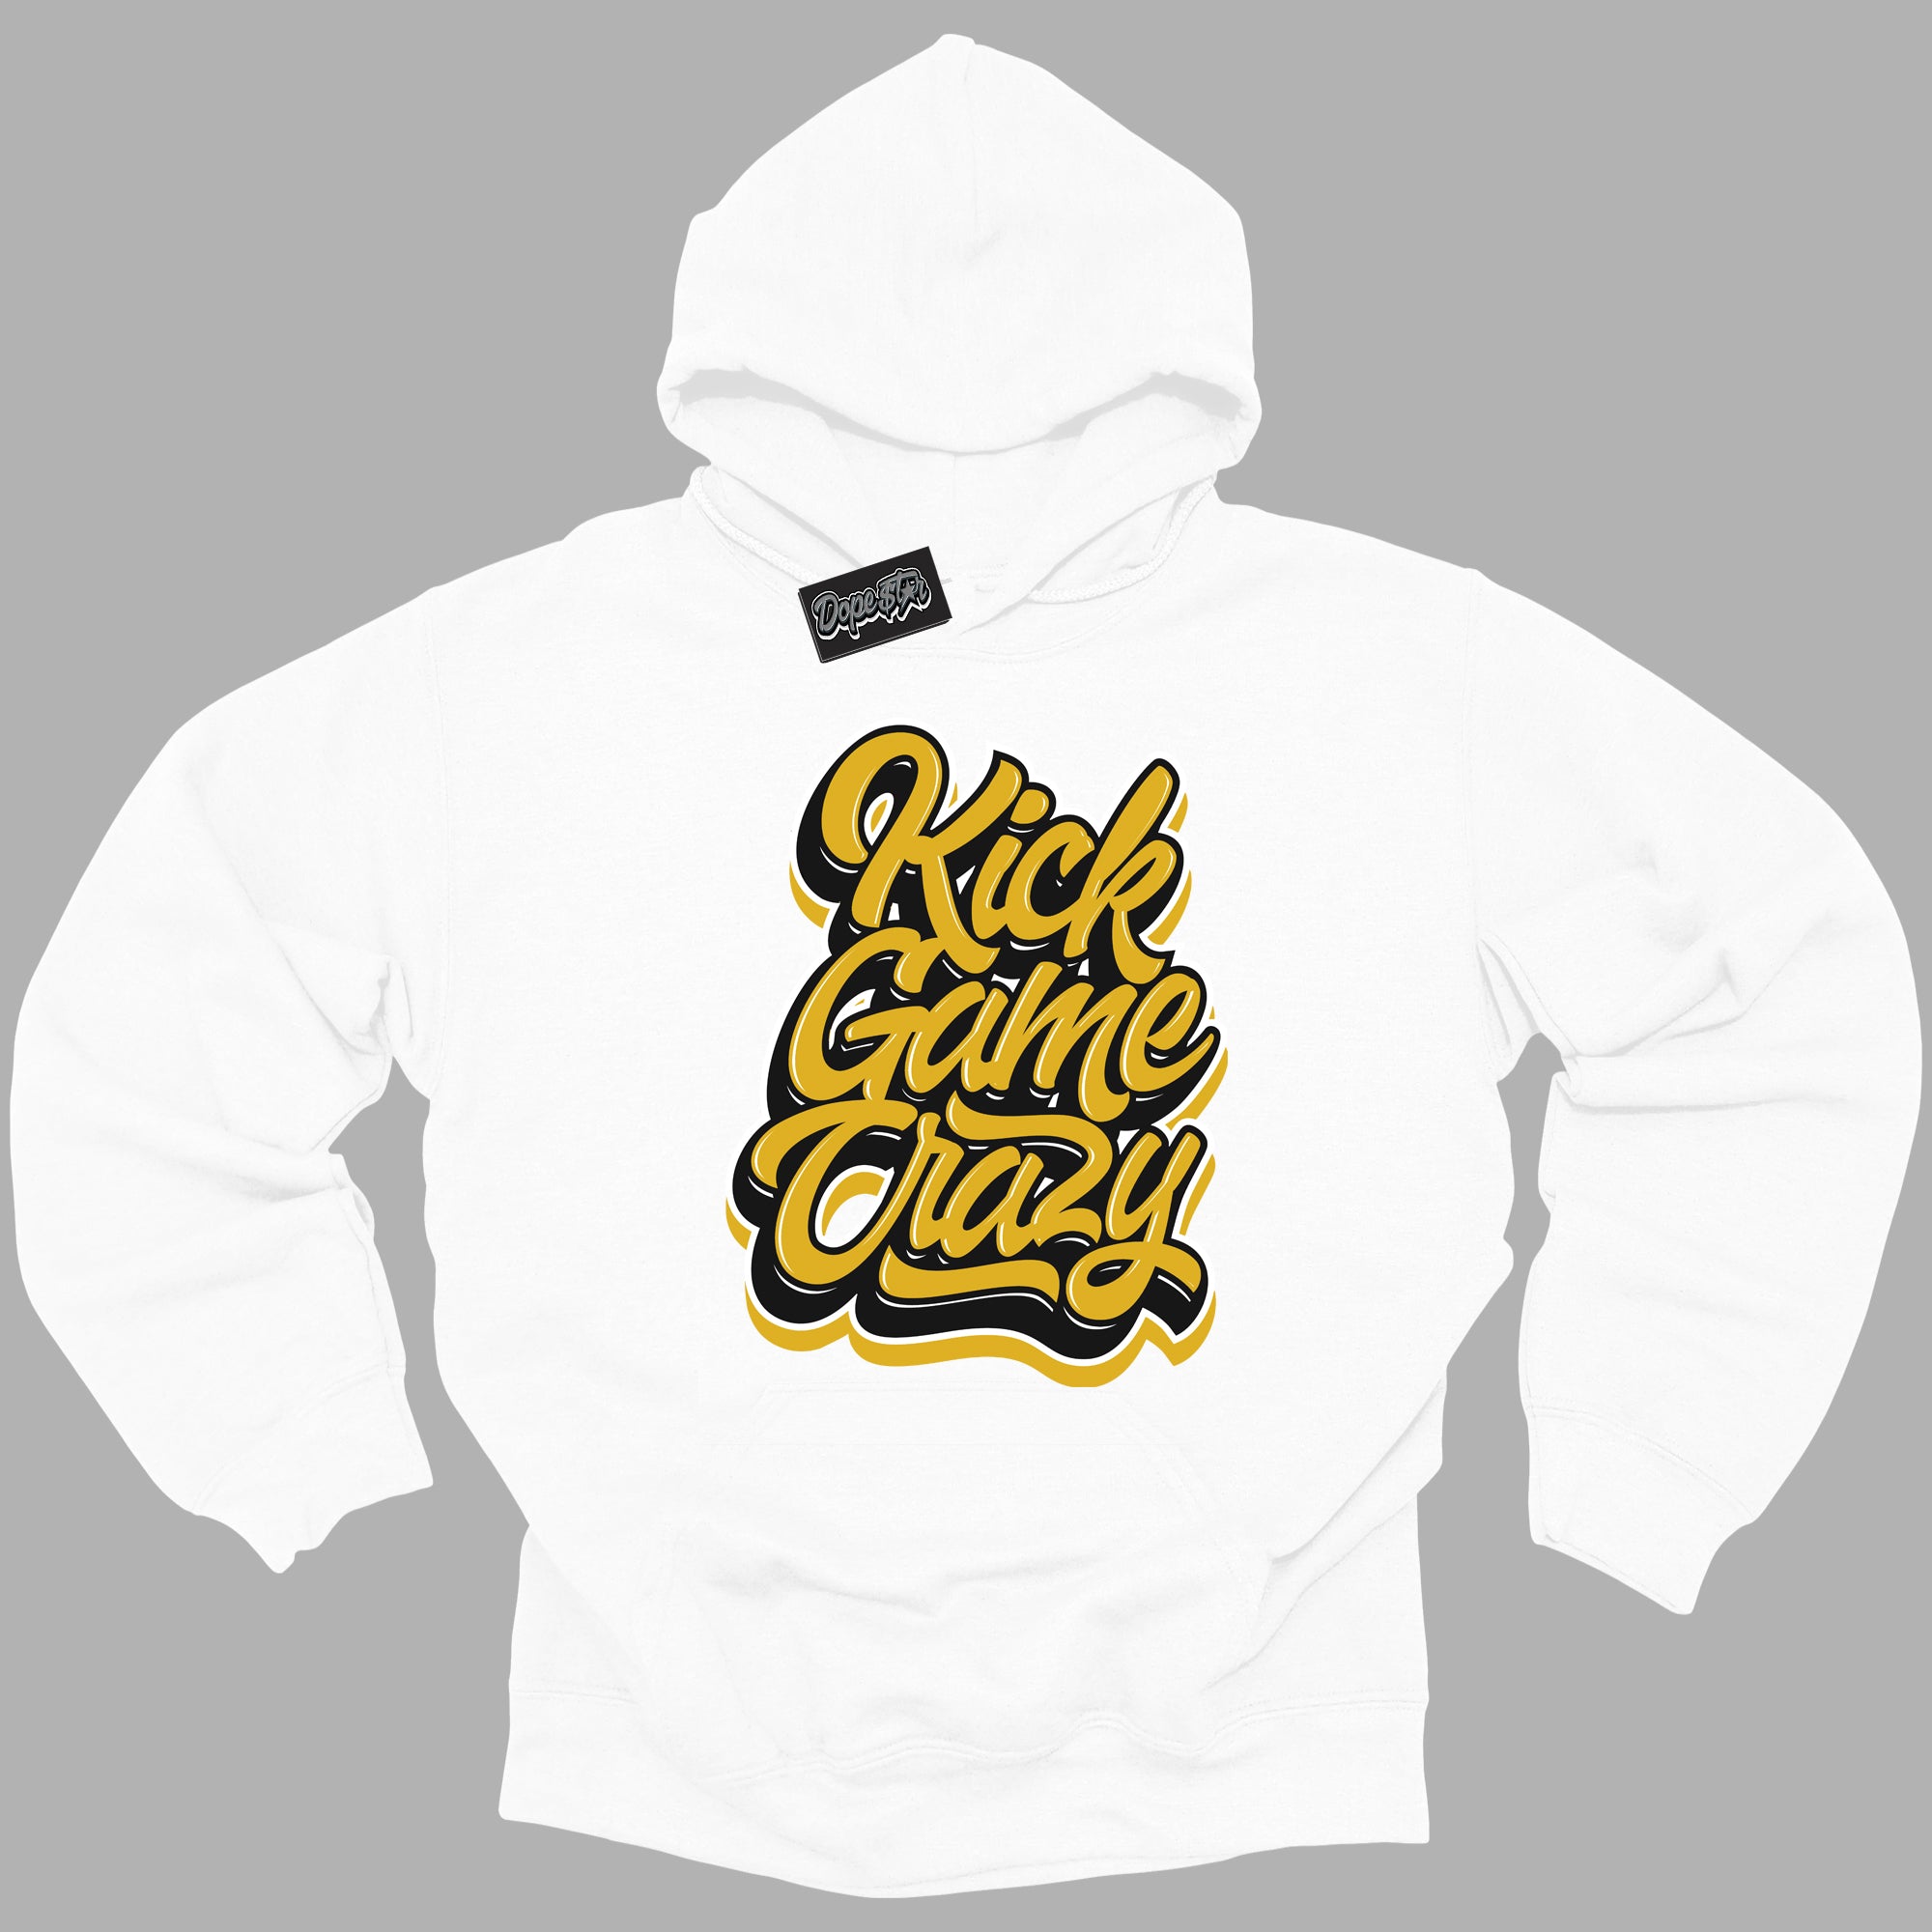 Cool White Hoodie with “ Kick Game Crazy ”  design that Perfectly Matches Yellow Ochre 6s Sneakers.